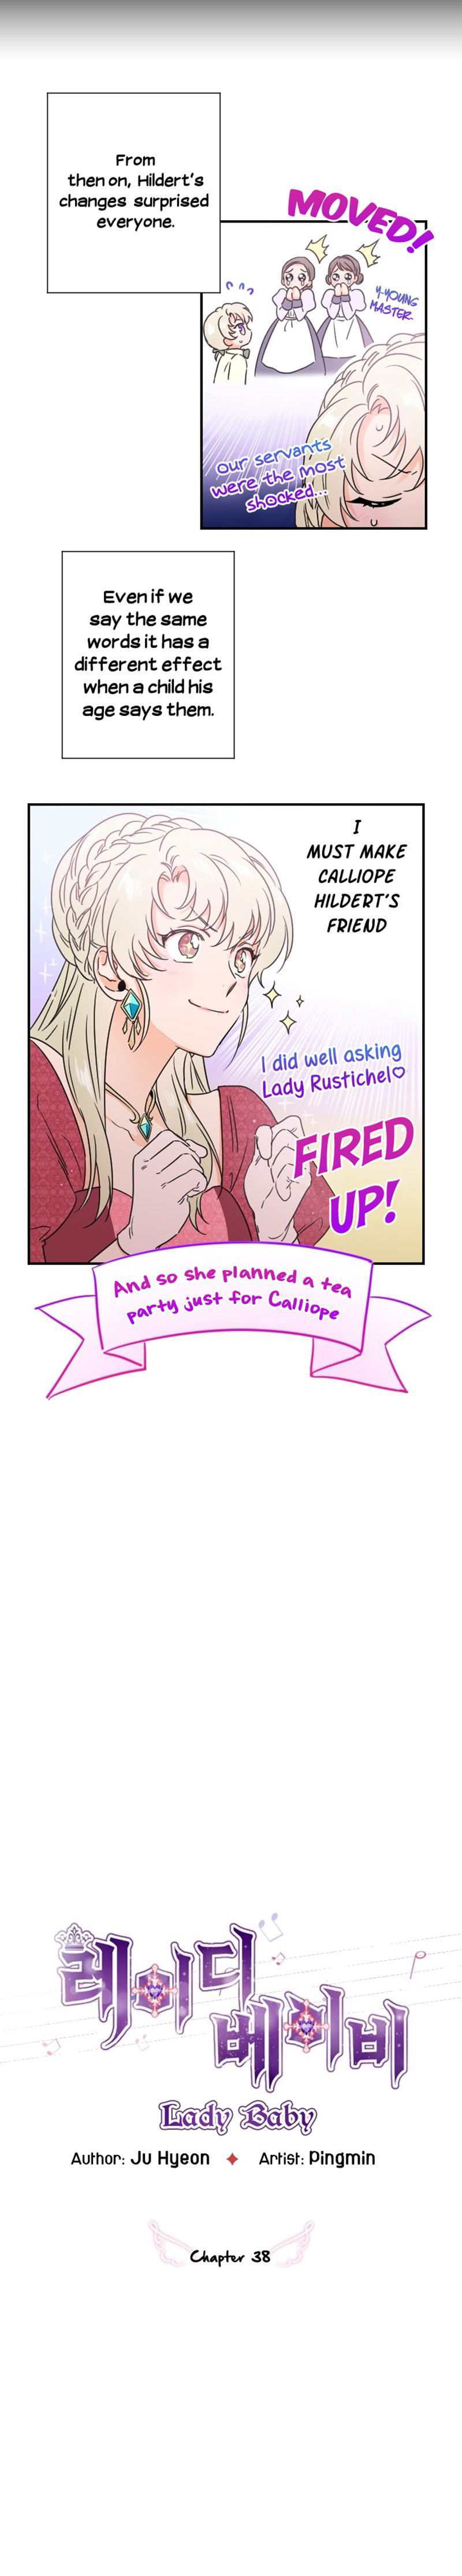 Lady Baby Chapter 38 page 4